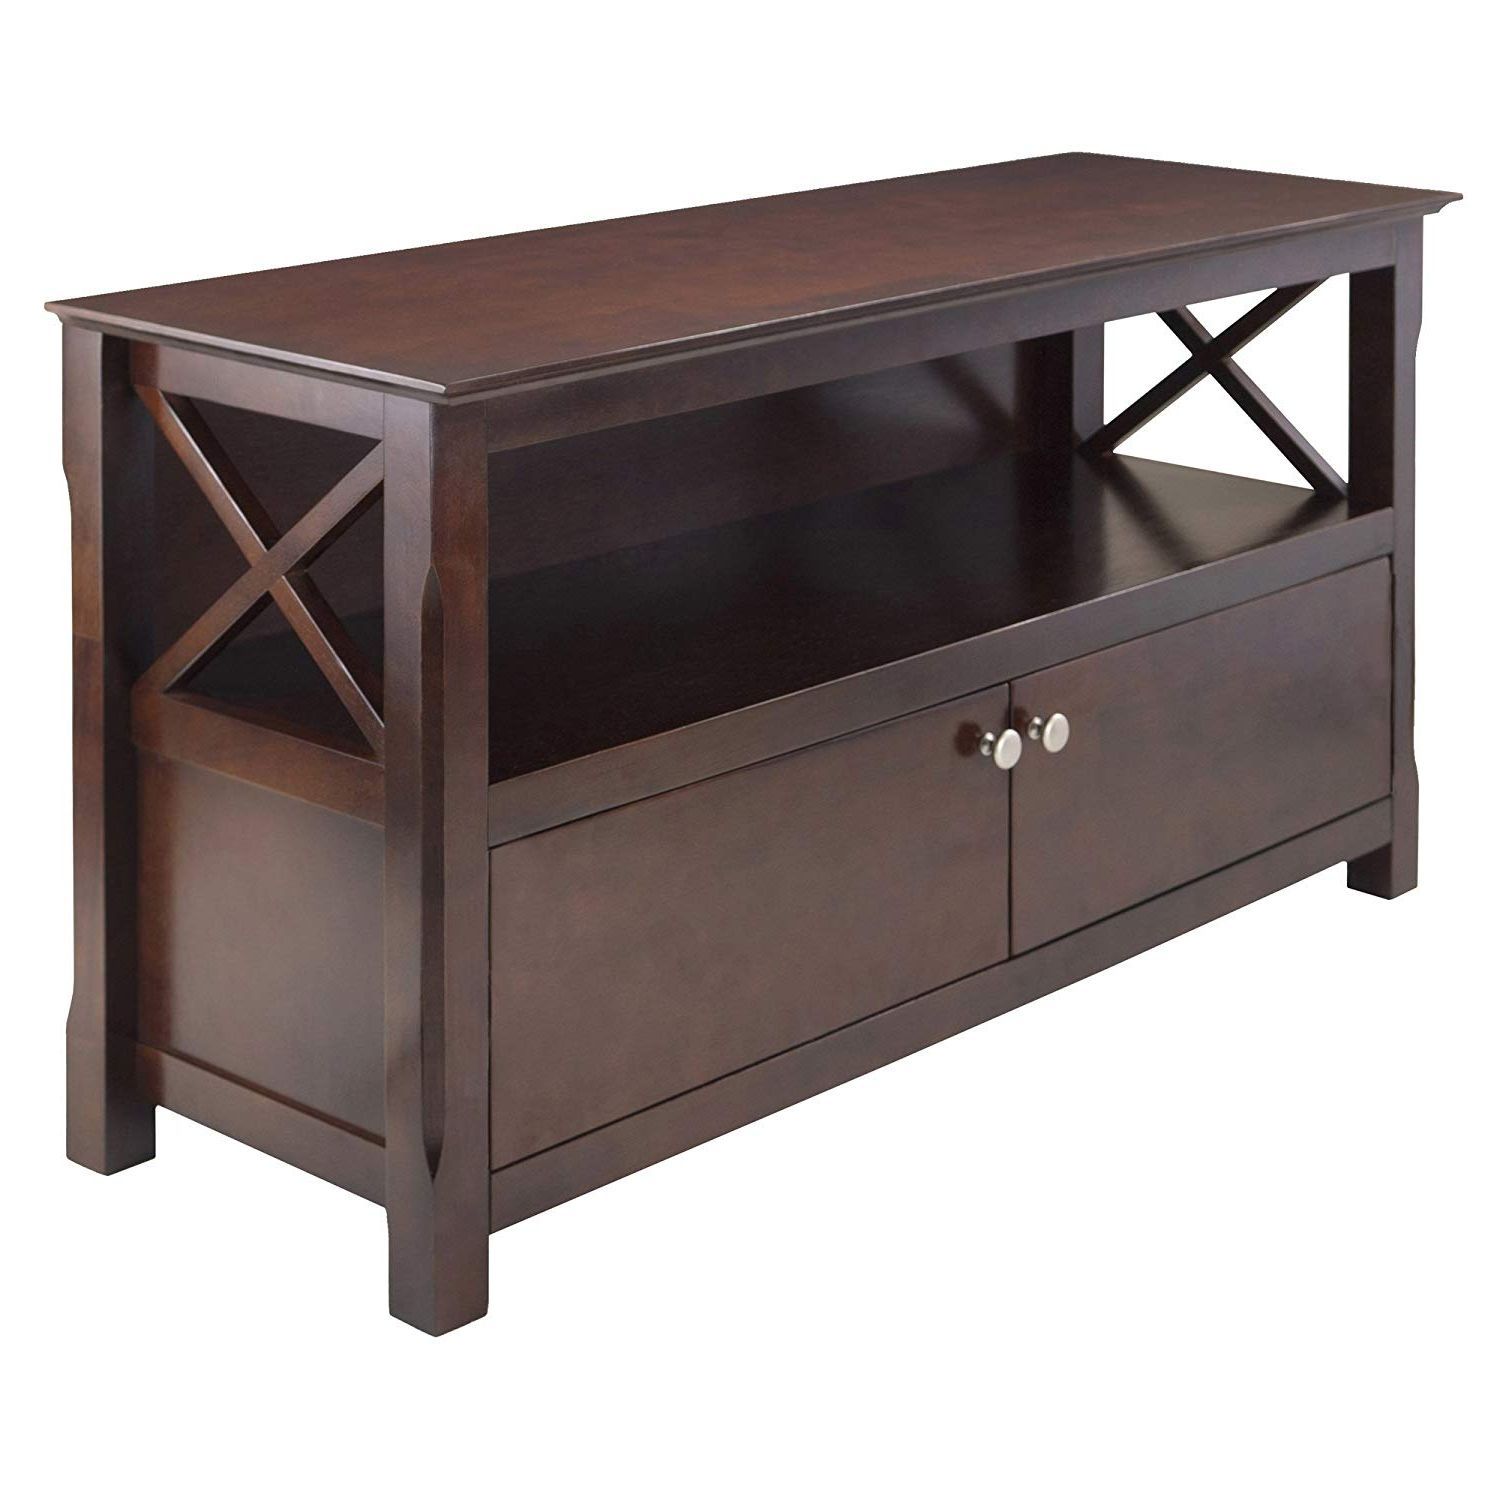 Amazon: Winsome Wood Xola Tv Stand: Kitchen & Dining For Most Recent Cheap Oak Tv Stands (Photo 6 of 20)